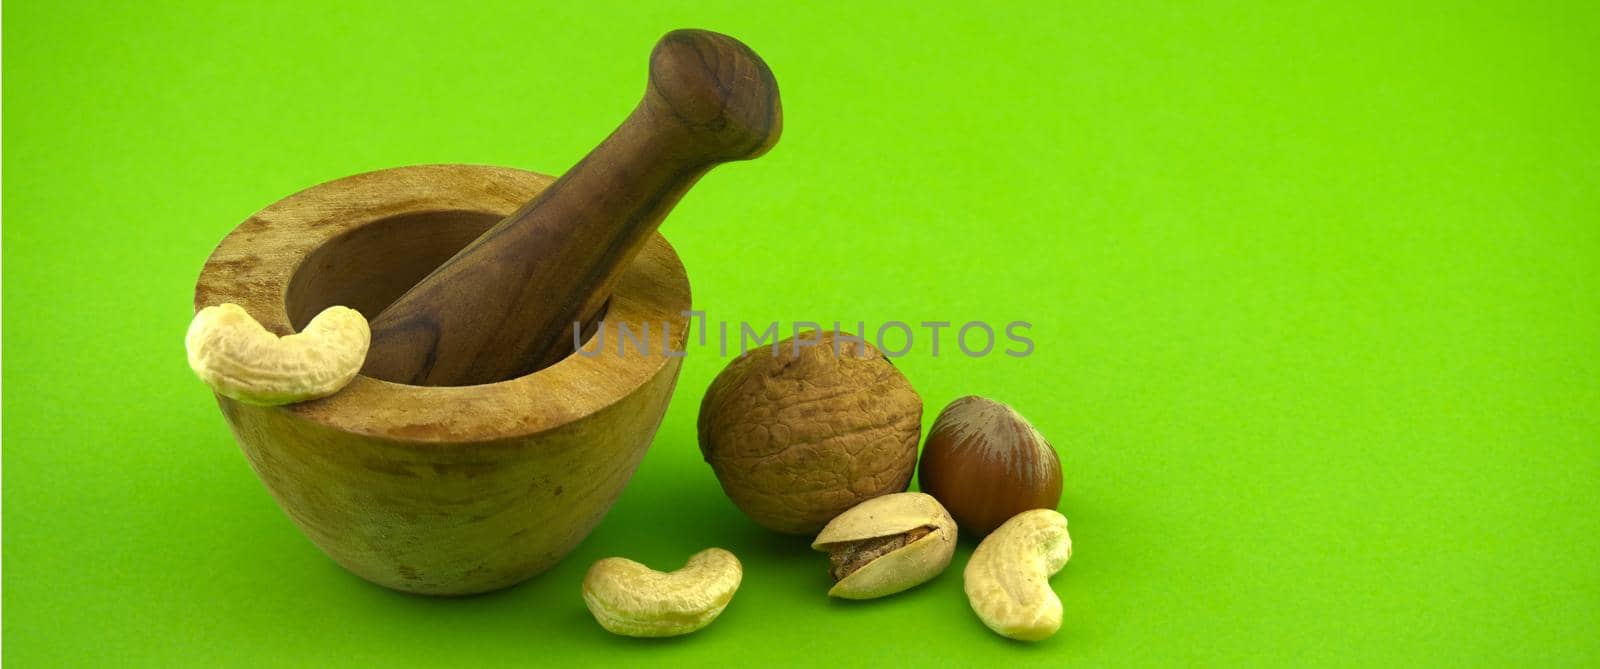 Wooden rustic-style mortar and pestle and various nuts over green background with free space for text. Spices and herb grinder